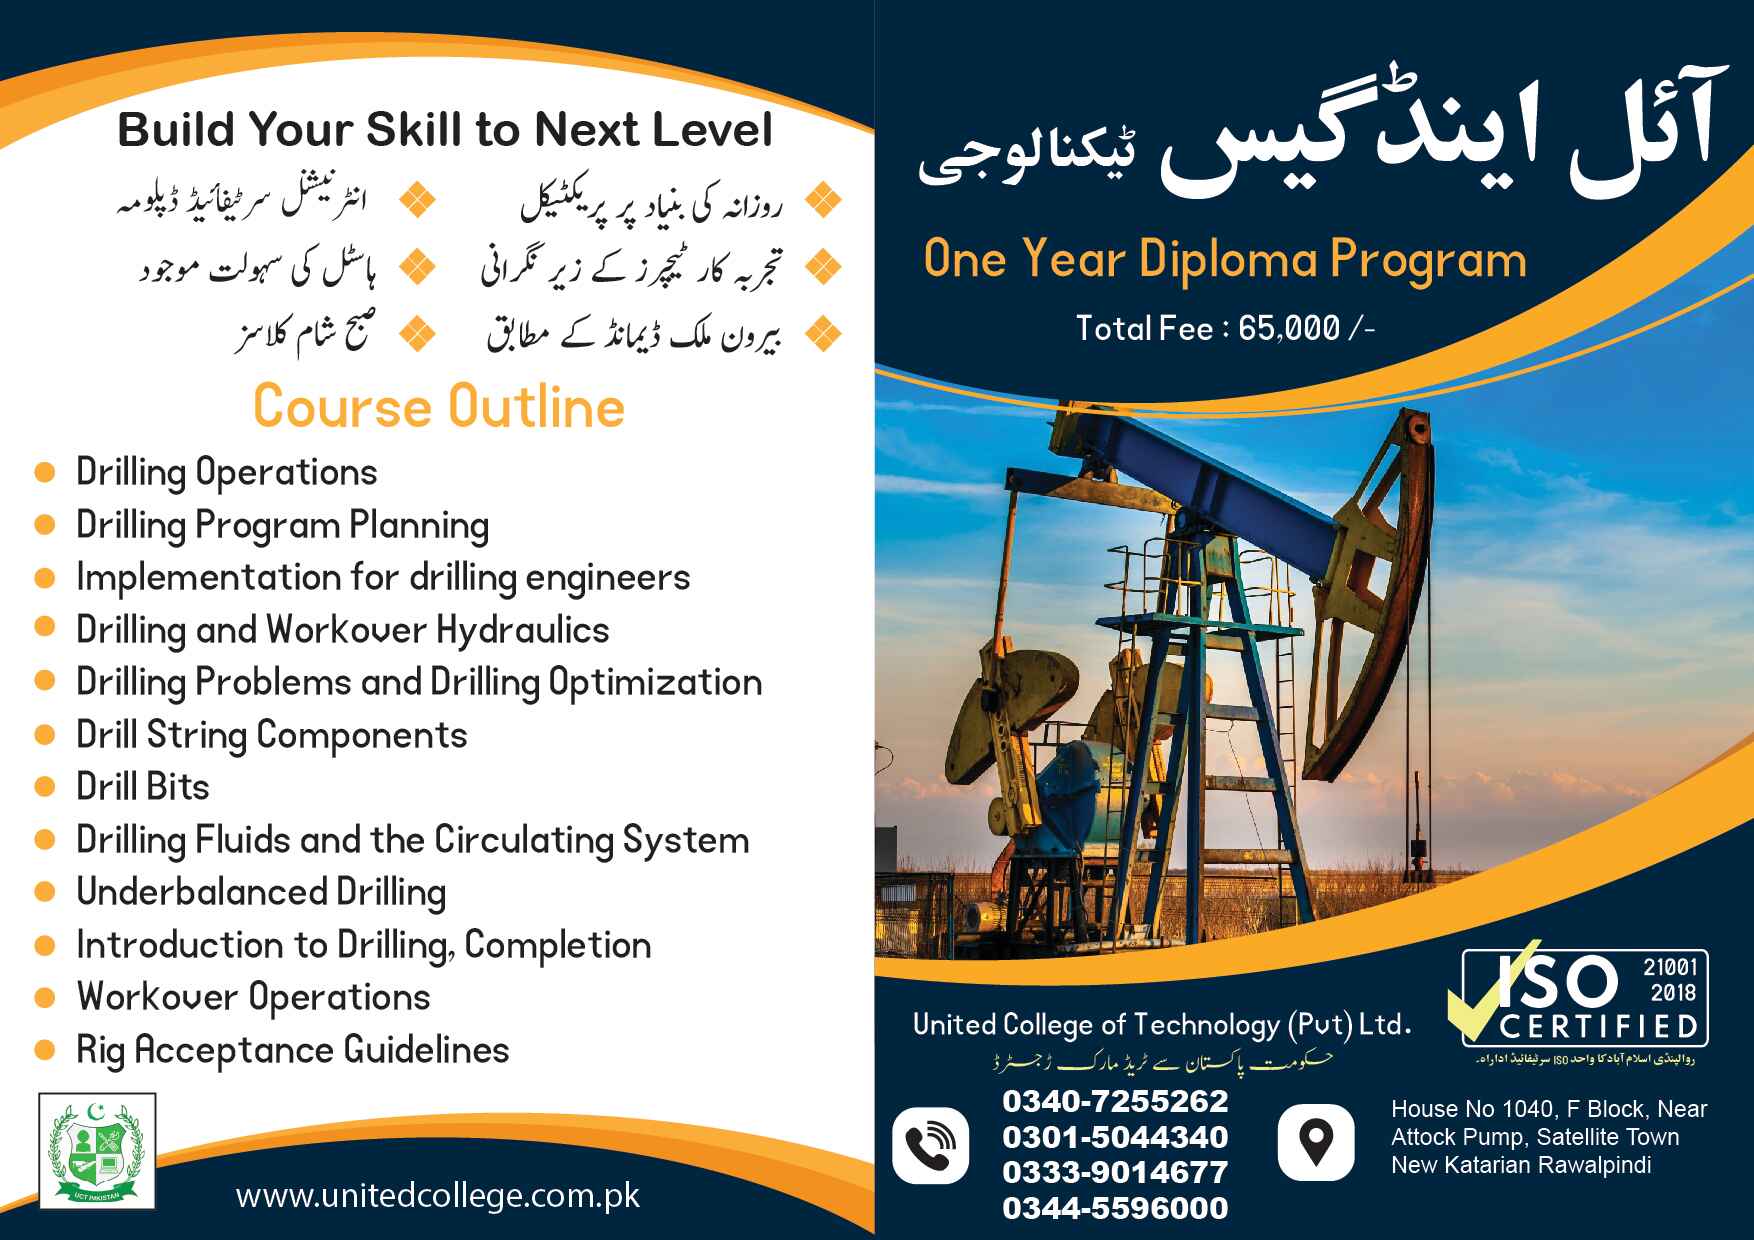 Oil and Gas Brochure